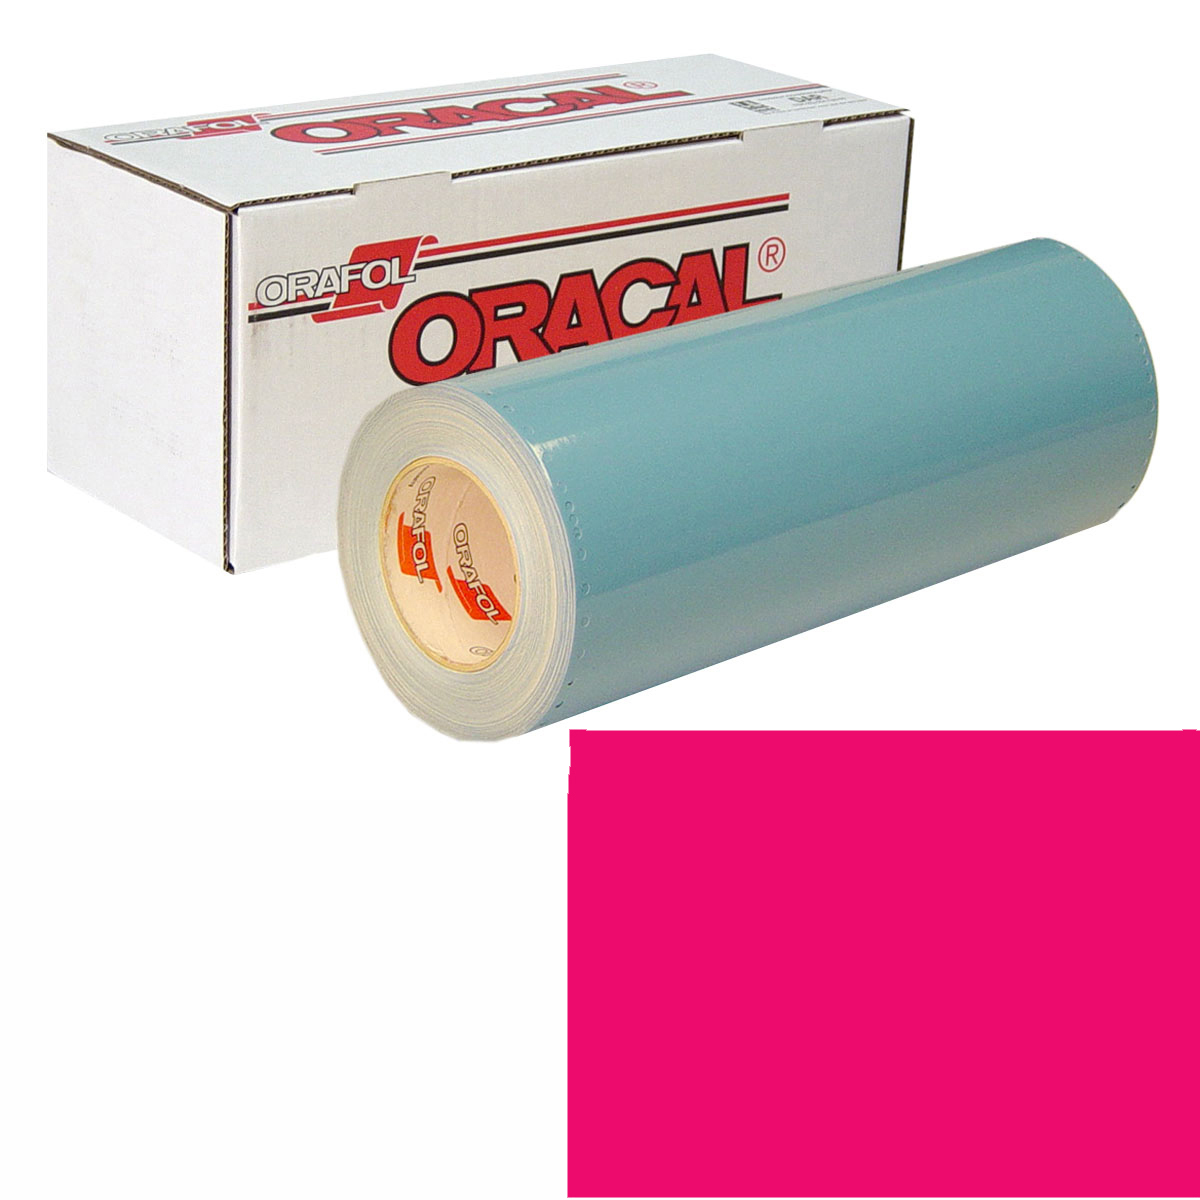 ORACAL 751 30in X 50yd 041 Pink